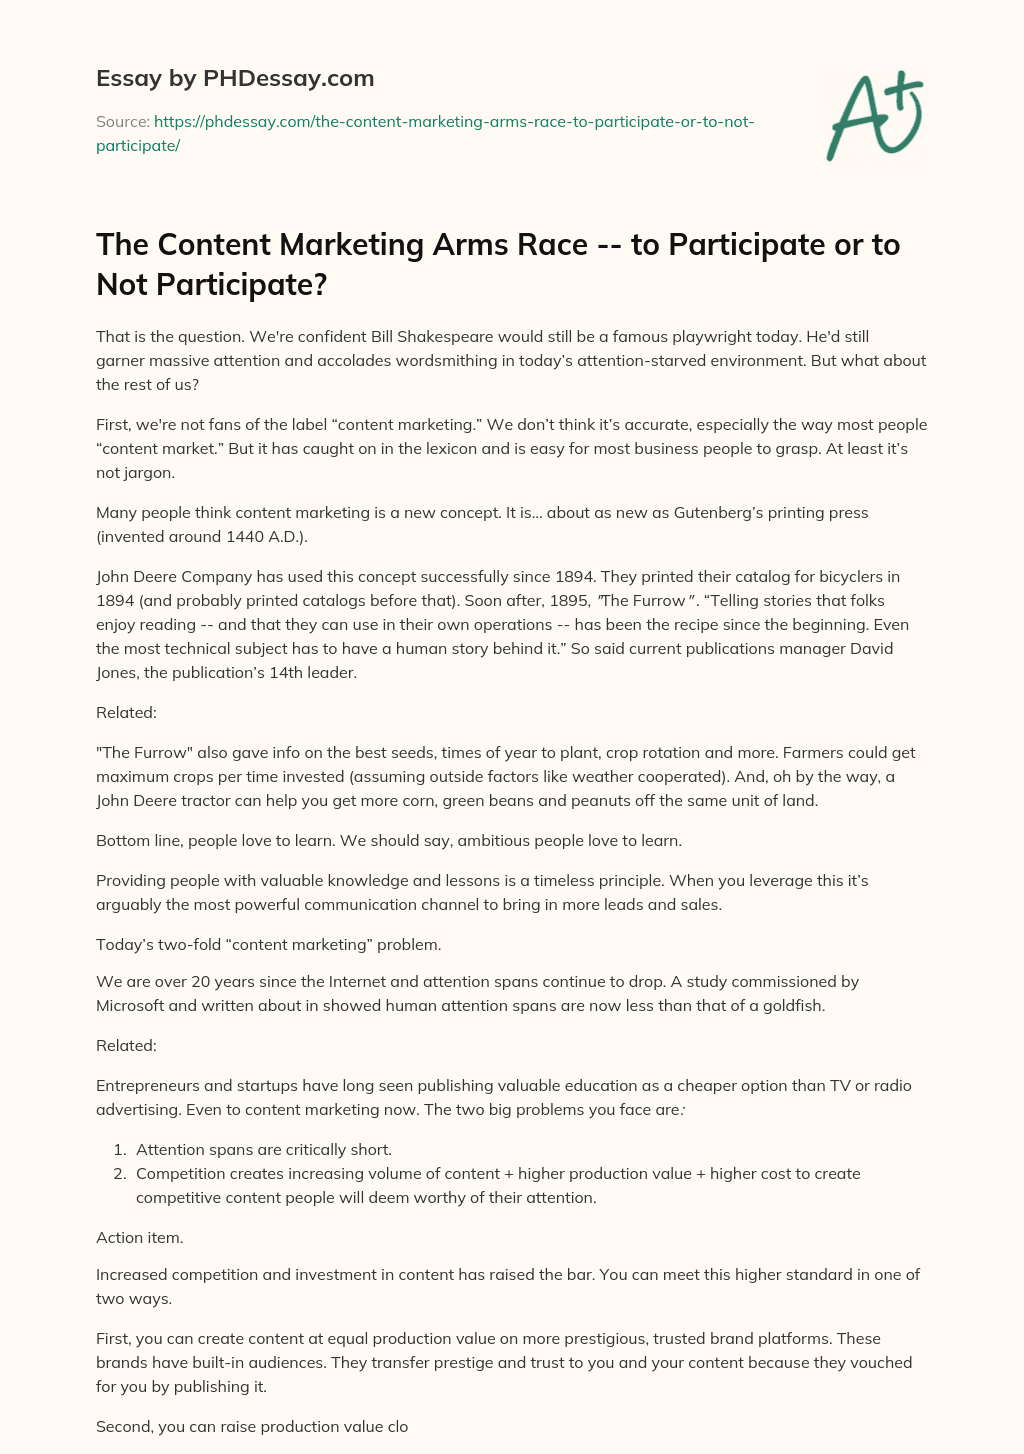 The Content Marketing Arms Race — to Participate or to Not Participate? essay